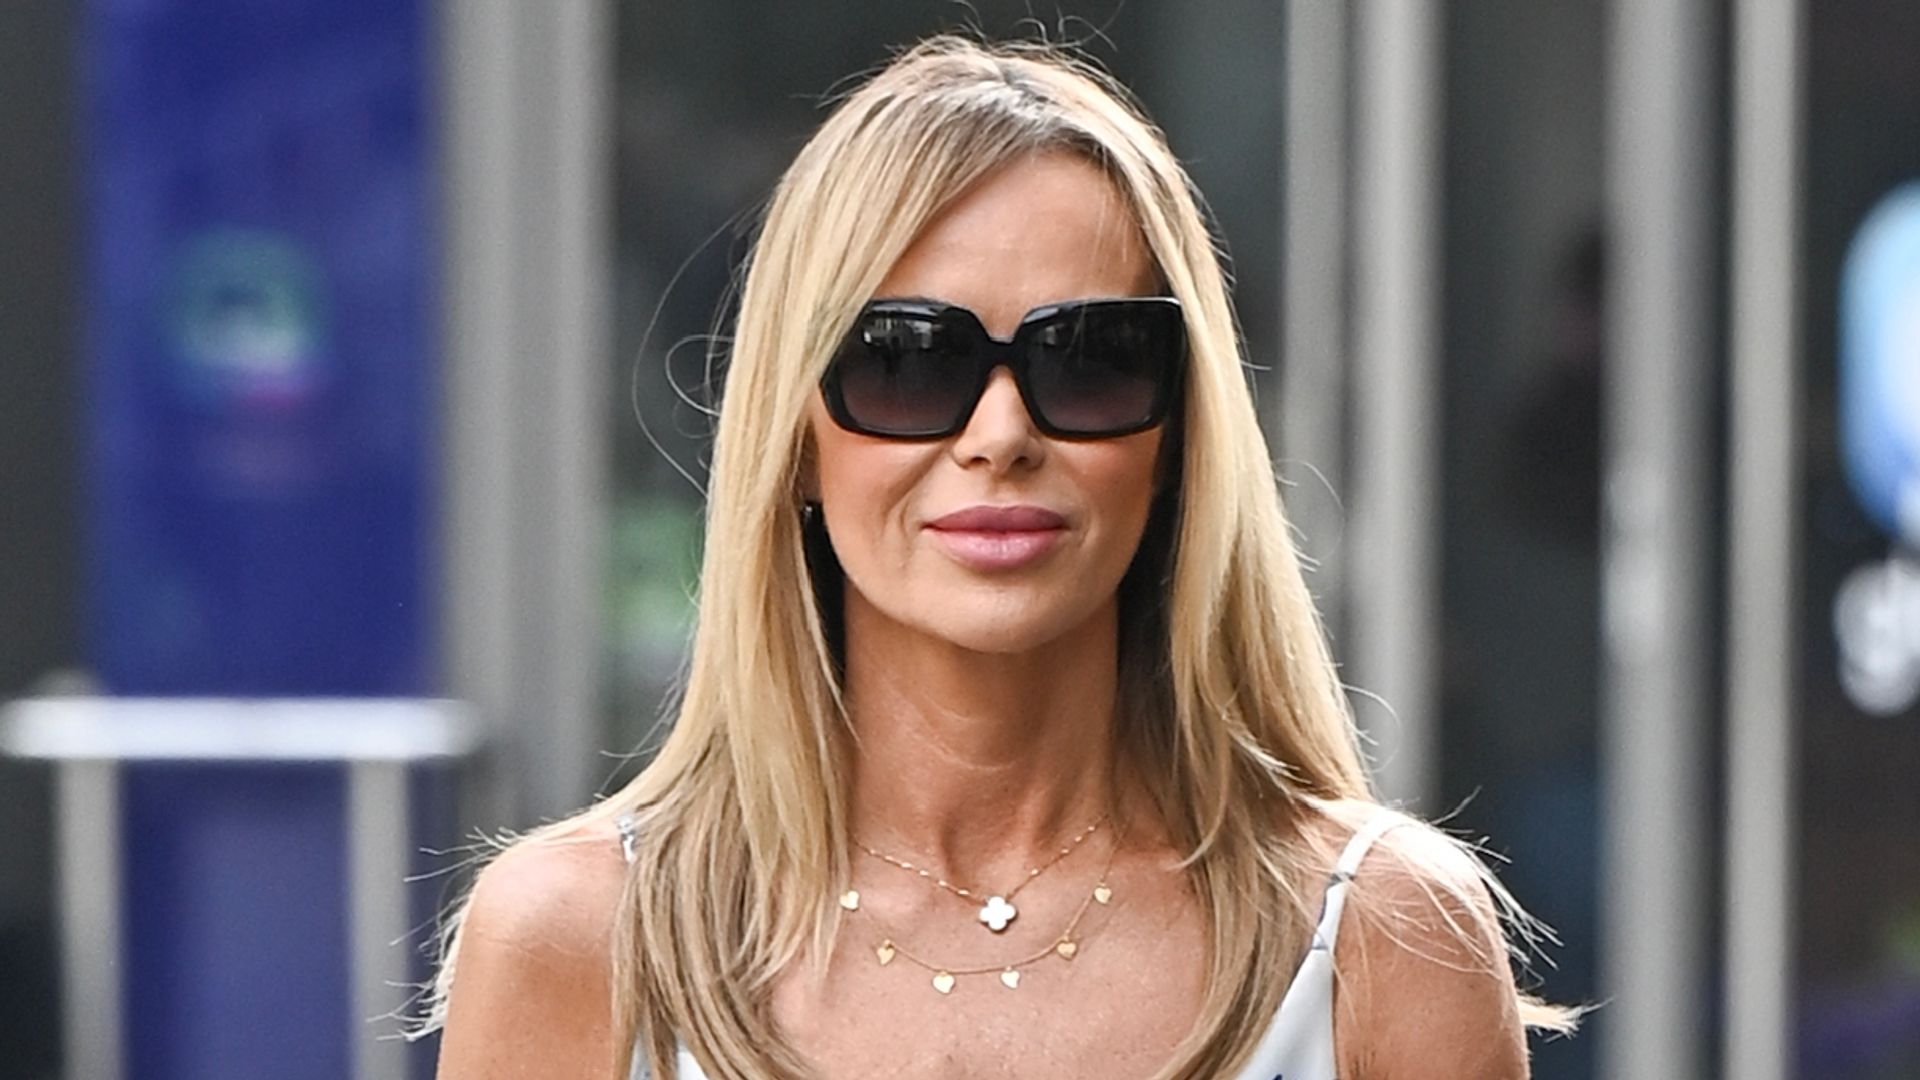 Amanda Holden sizzles as she displays toned legs in tiny mini dress